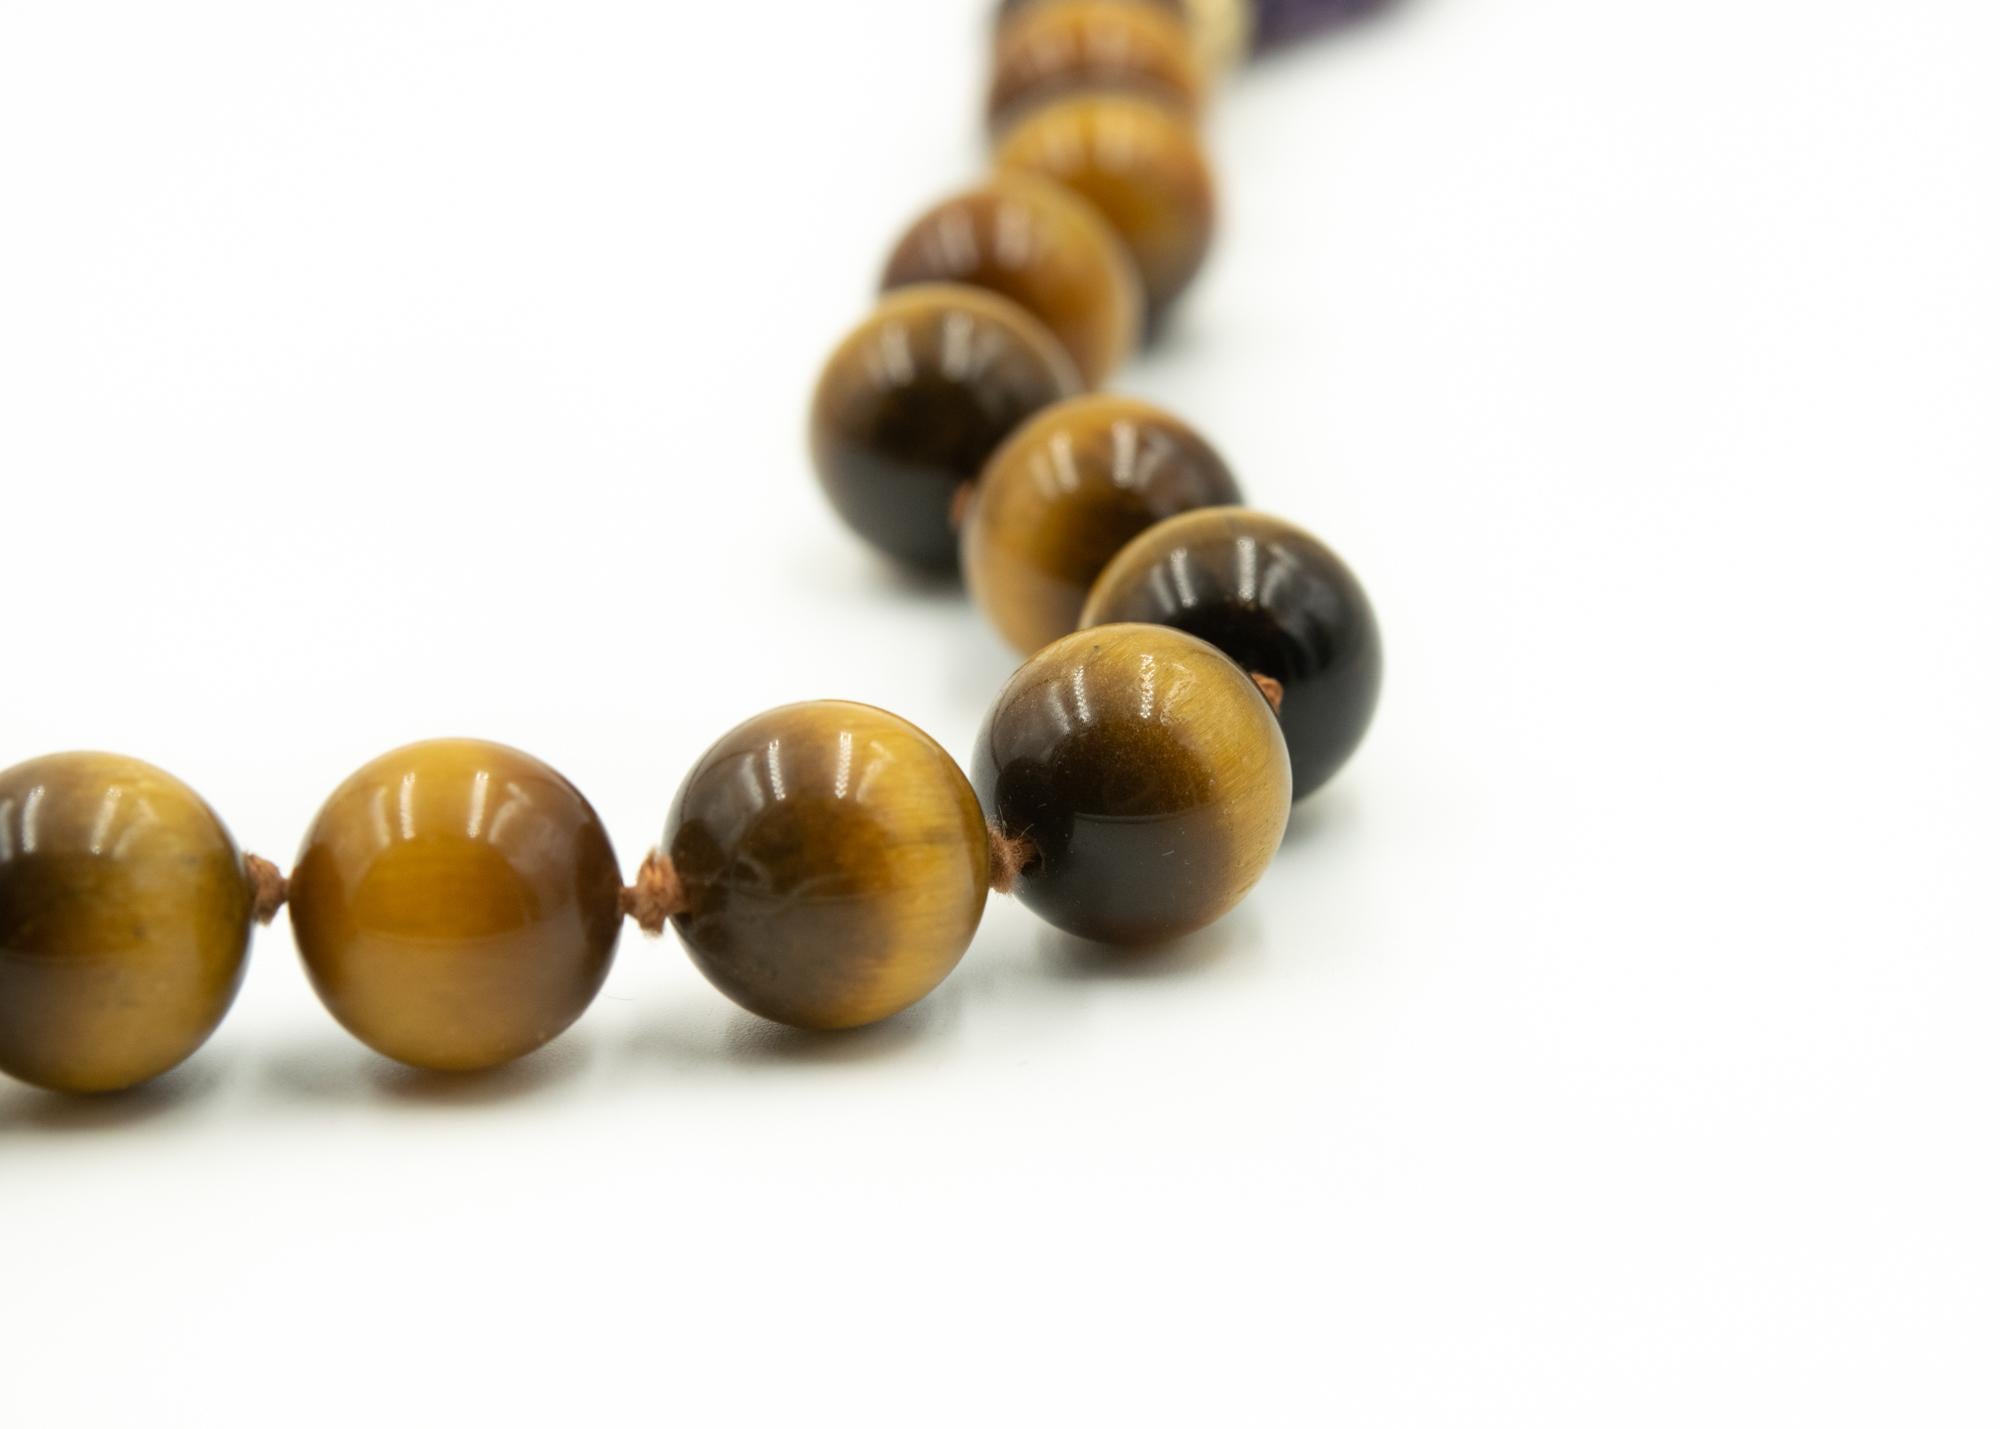 Long Tiger's Eye Amethyst and Garnet Bead Necklace with Gold Filled Ribbed Beads For Sale 2